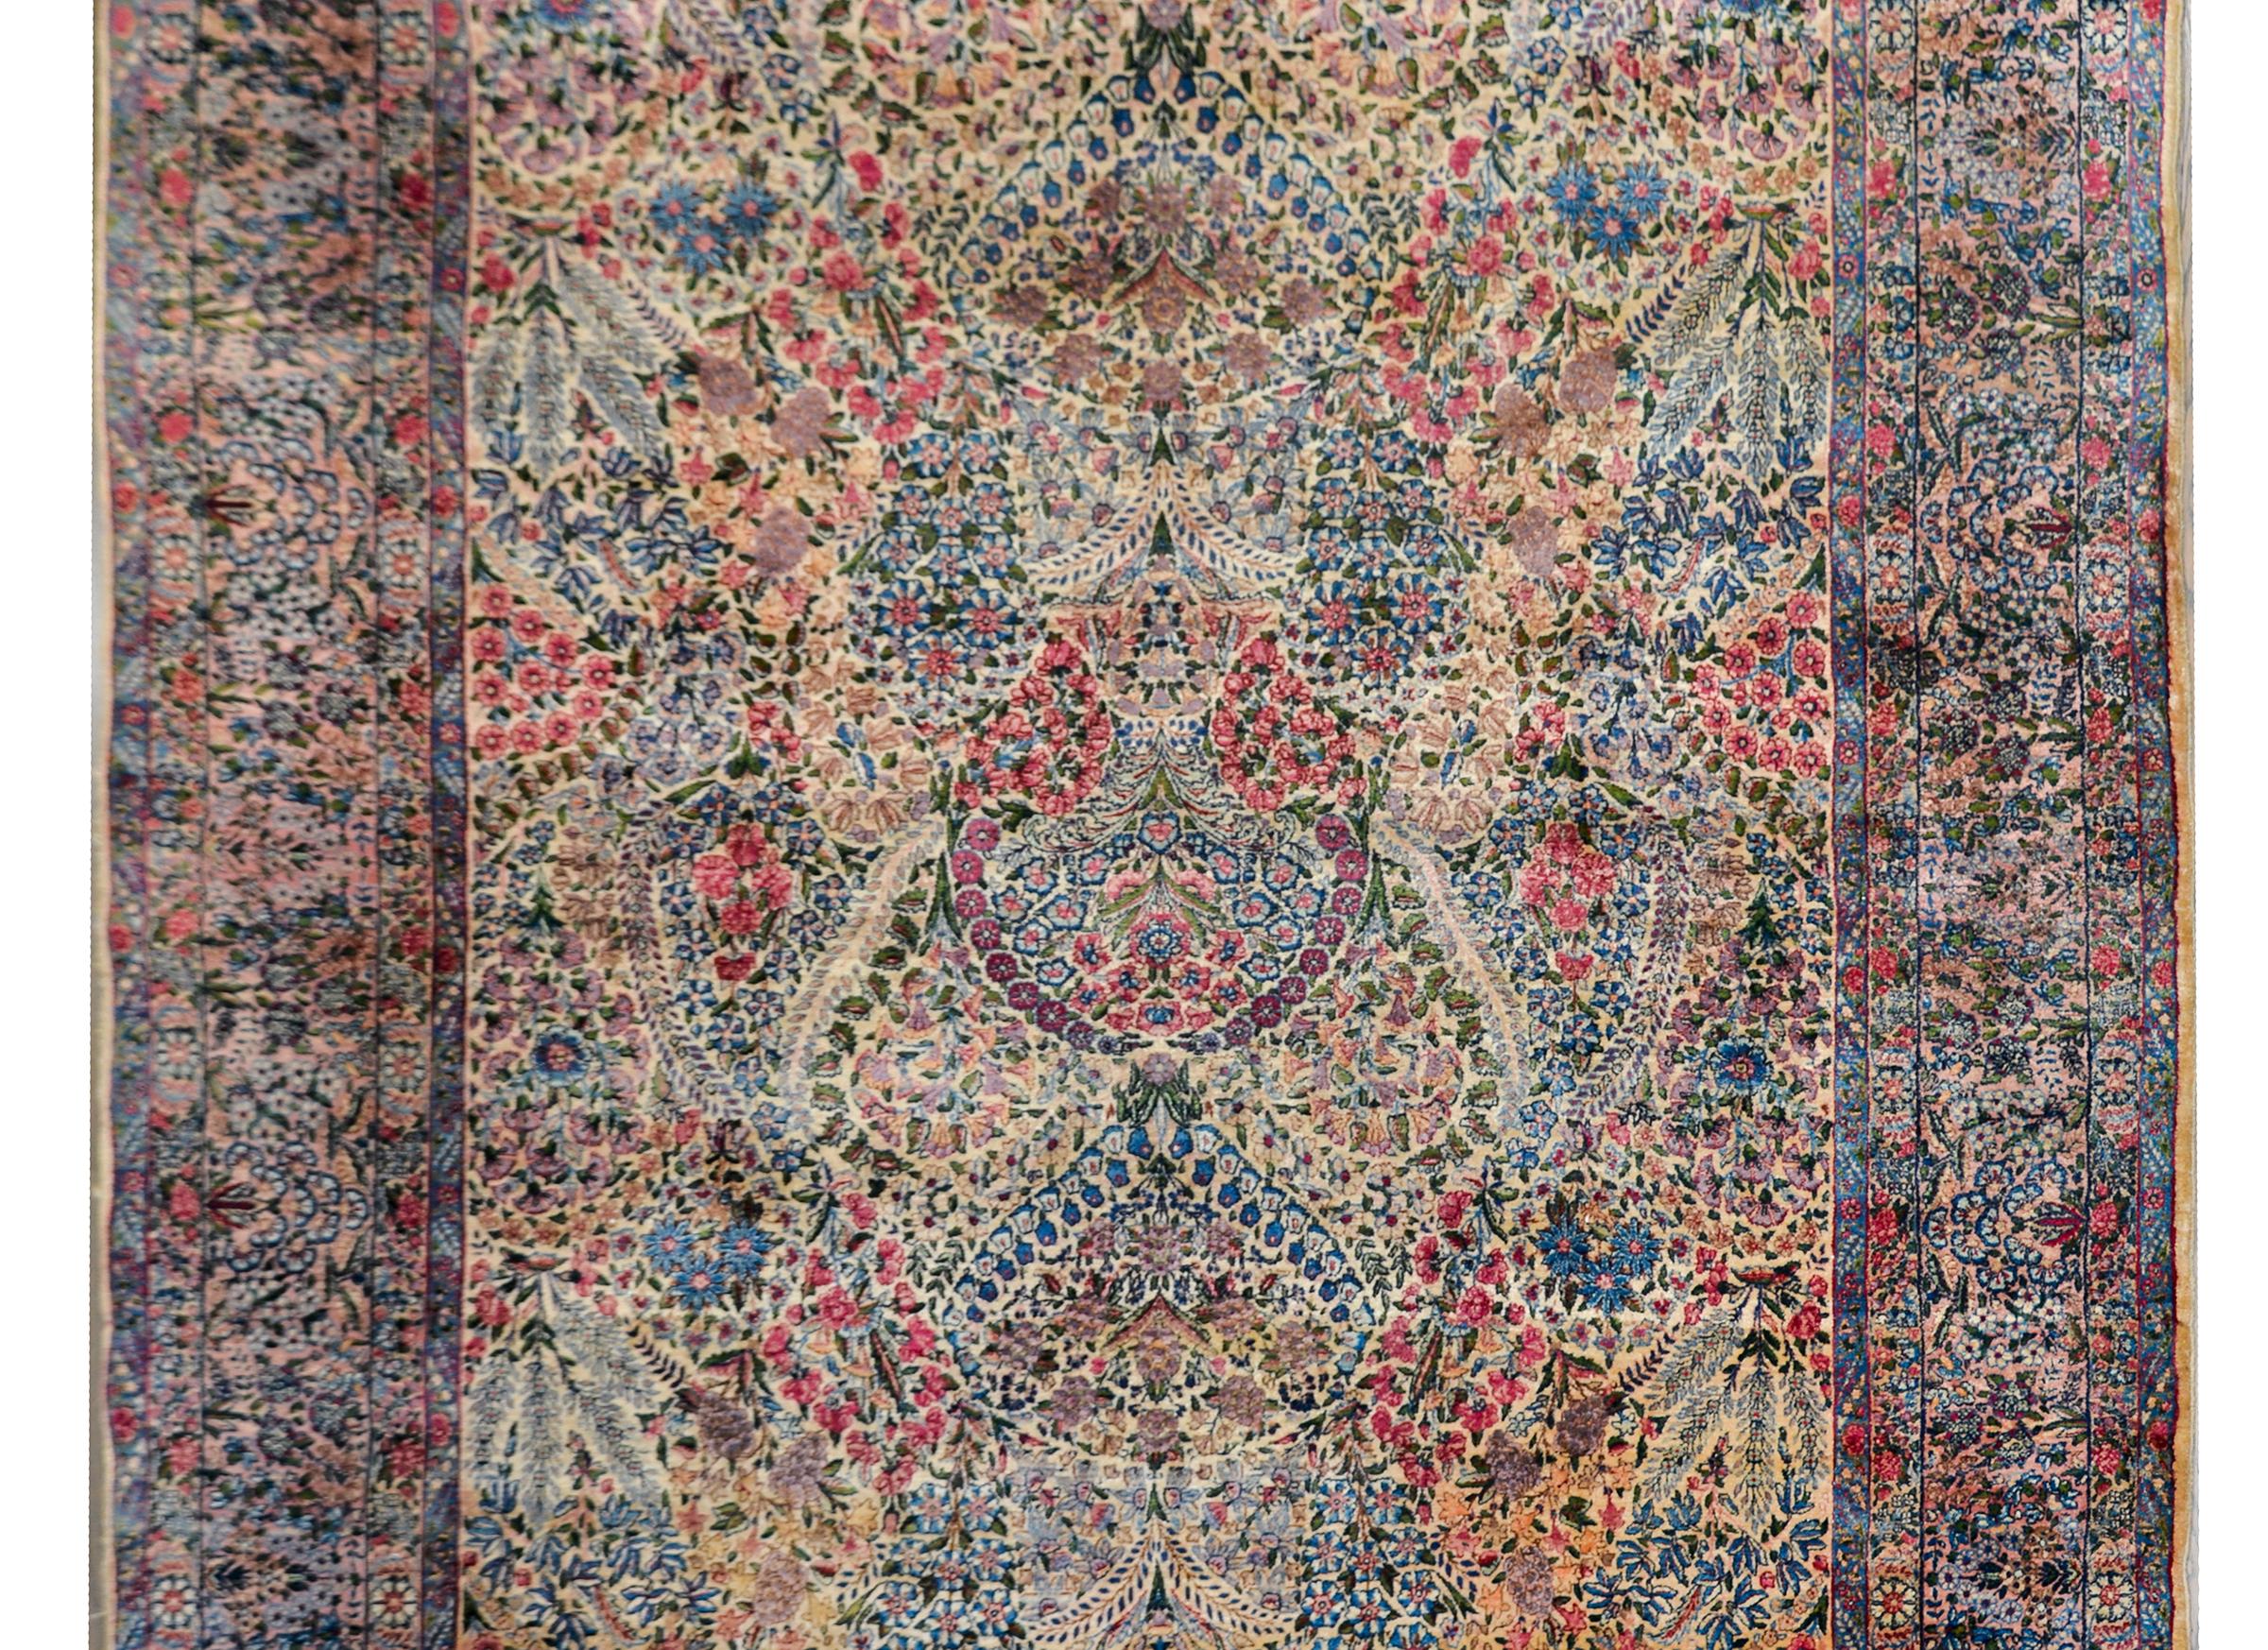 One of the best early 20th century Persian Lavar Kirman rugs we've ever seen! The patten is extraordinary with an all-over floral cluster pattern woven in traditional Kirman colors of pinks, reds, light and dark indigos, creams, and greens, and all